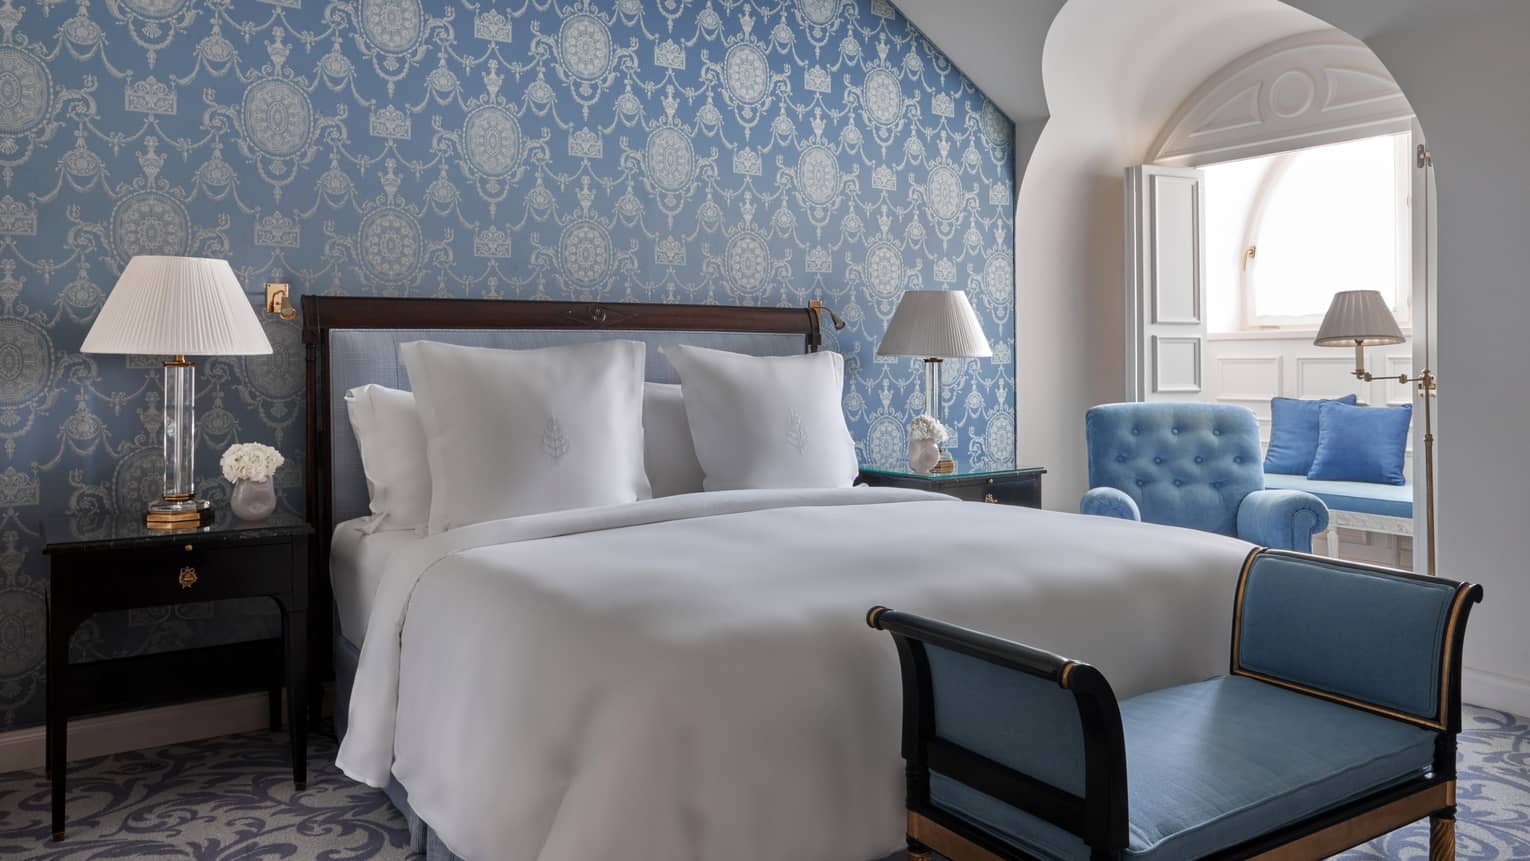 Hotel bedroom with blue wallpaper